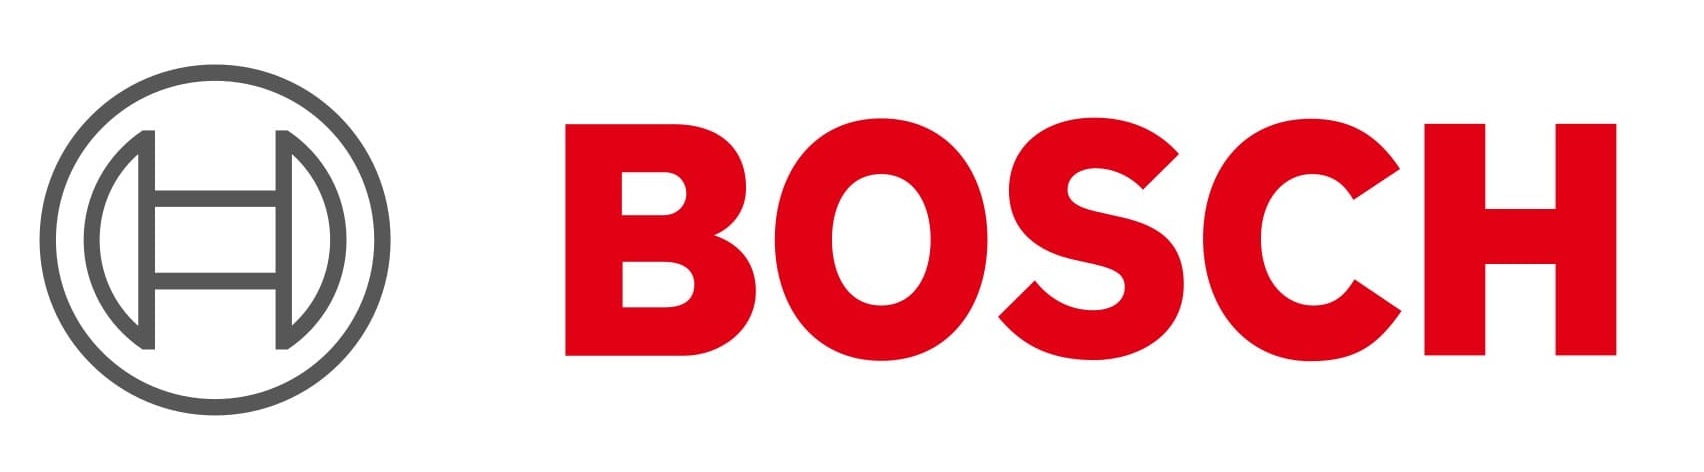 BOSCH Stoves Oven Service, Samsung Stoves Oven Service